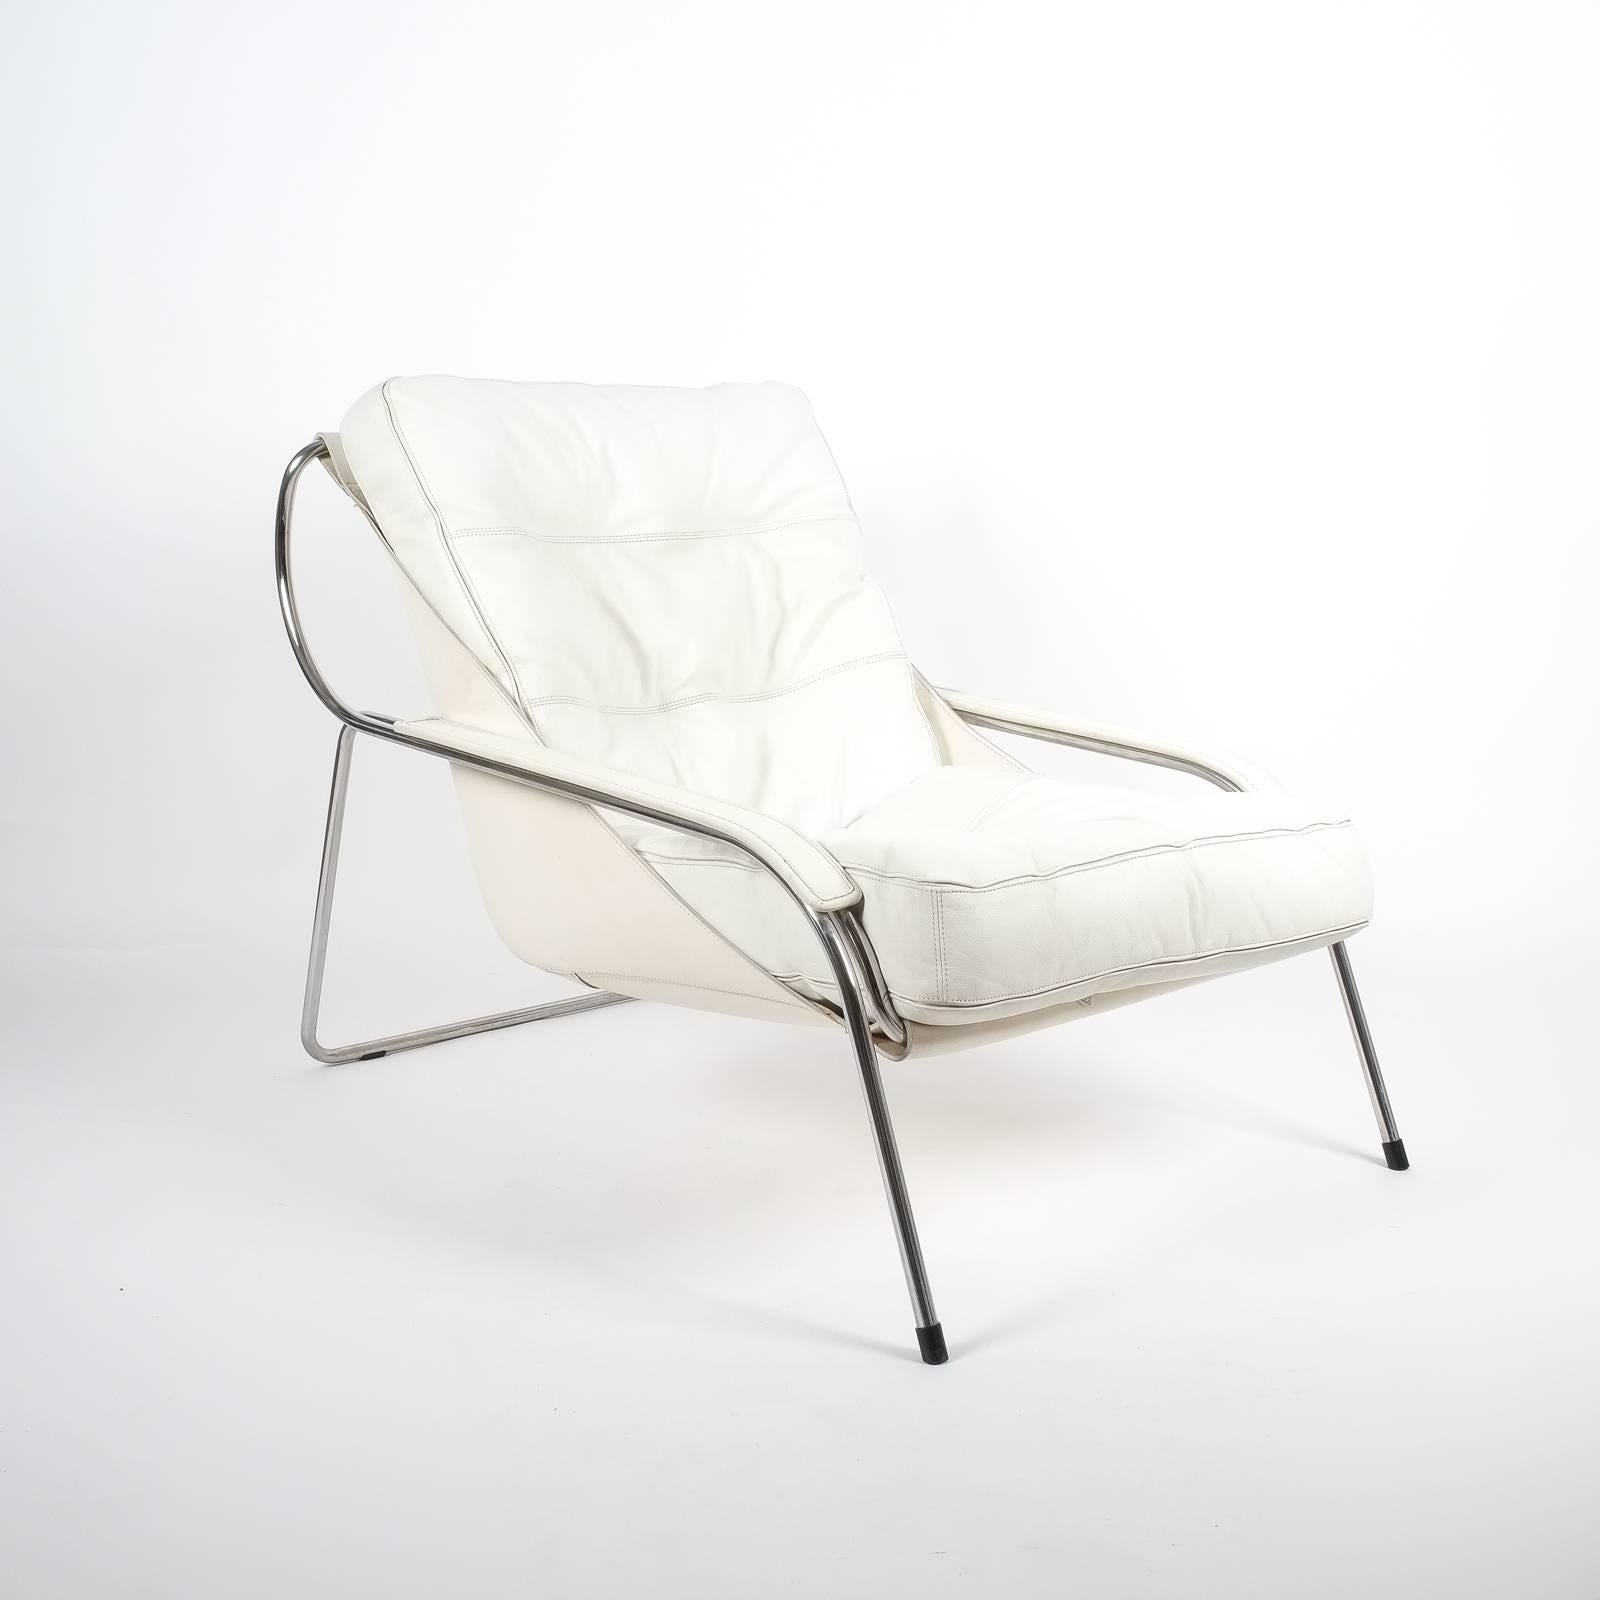 Elegant Maggiolina chair by Zanotta designed by Marco Zanuso, originally designed in 1947. Cowhide sling supports one large Nappa leather cushion. A stainless steel frame supports this very comfortable and sleek lounge chair. The condition is very